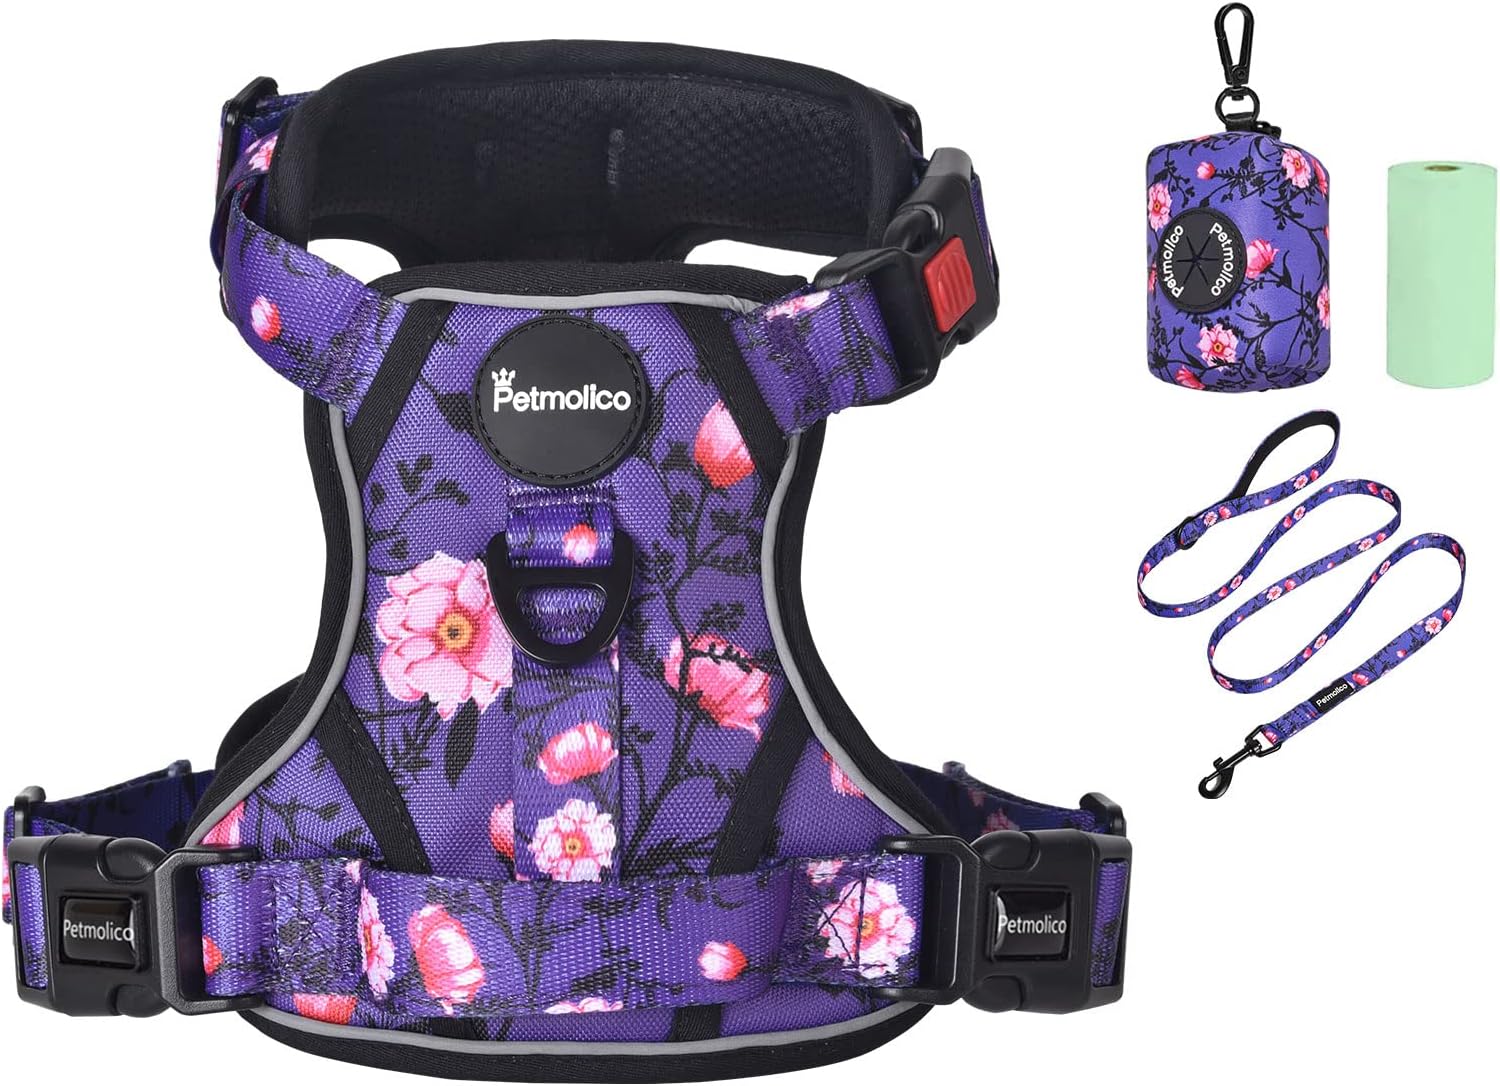 Petmolico No Pull Dog Harness Set, 2 Leash Attchment Easy Control Handle Reflective Vest Dog Harness Small Breed, Small Dogs Harness and Leash Set with Poop Bag Holder, Small Purple Peach